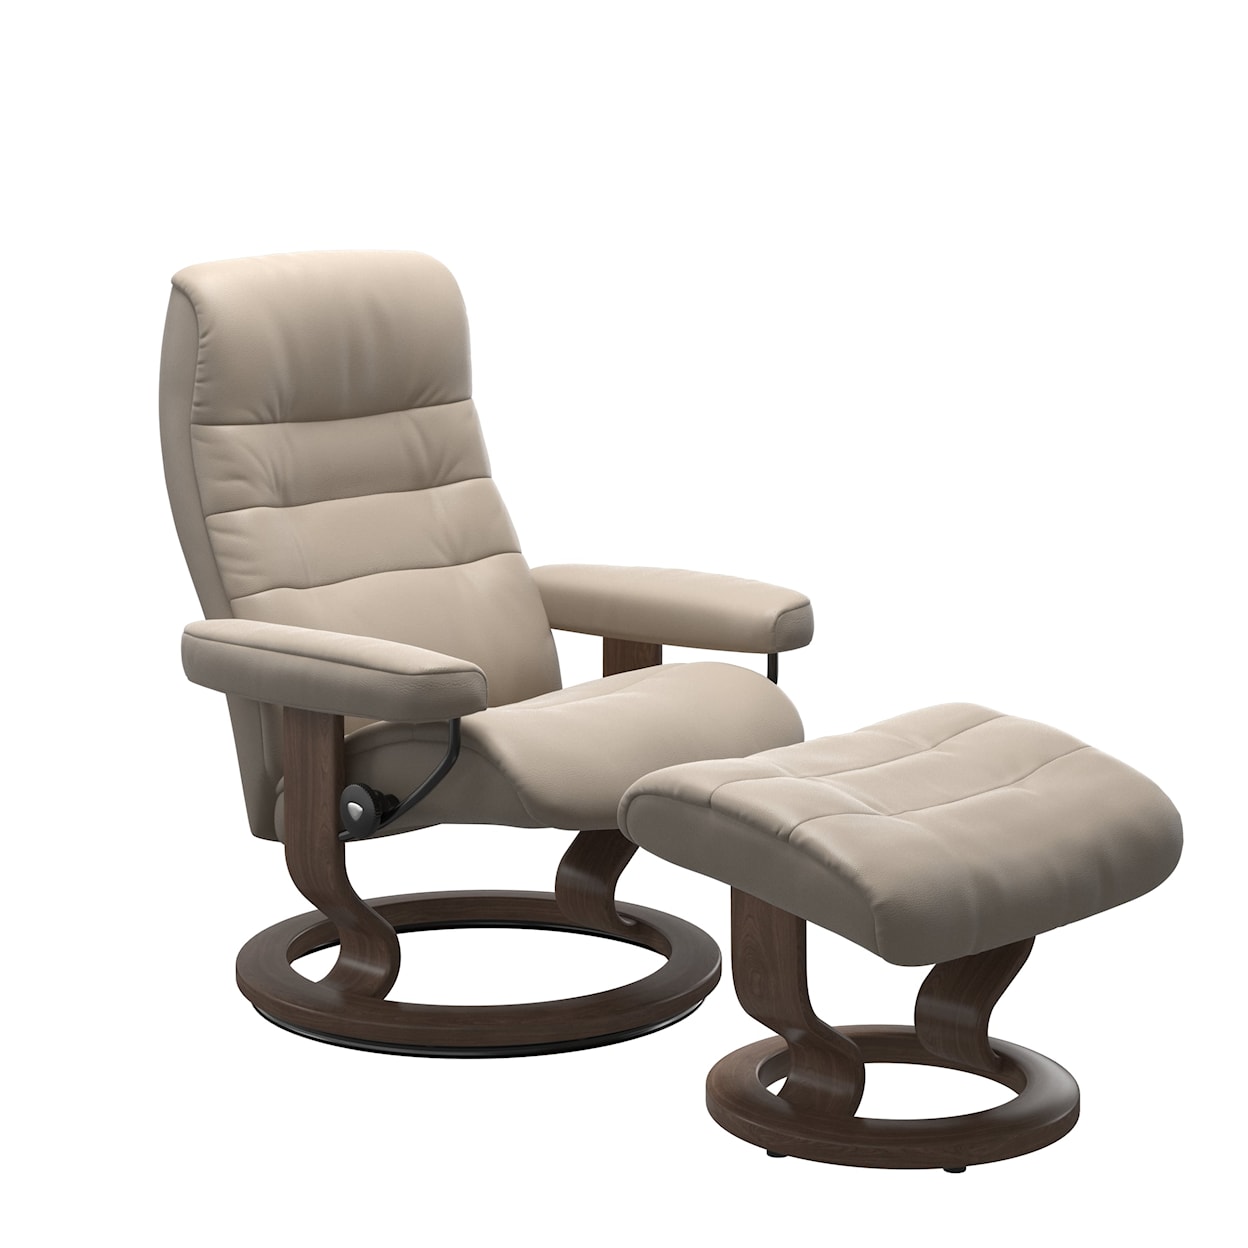 Stressless by Ekornes Opal Medium Recliner with Classic Base